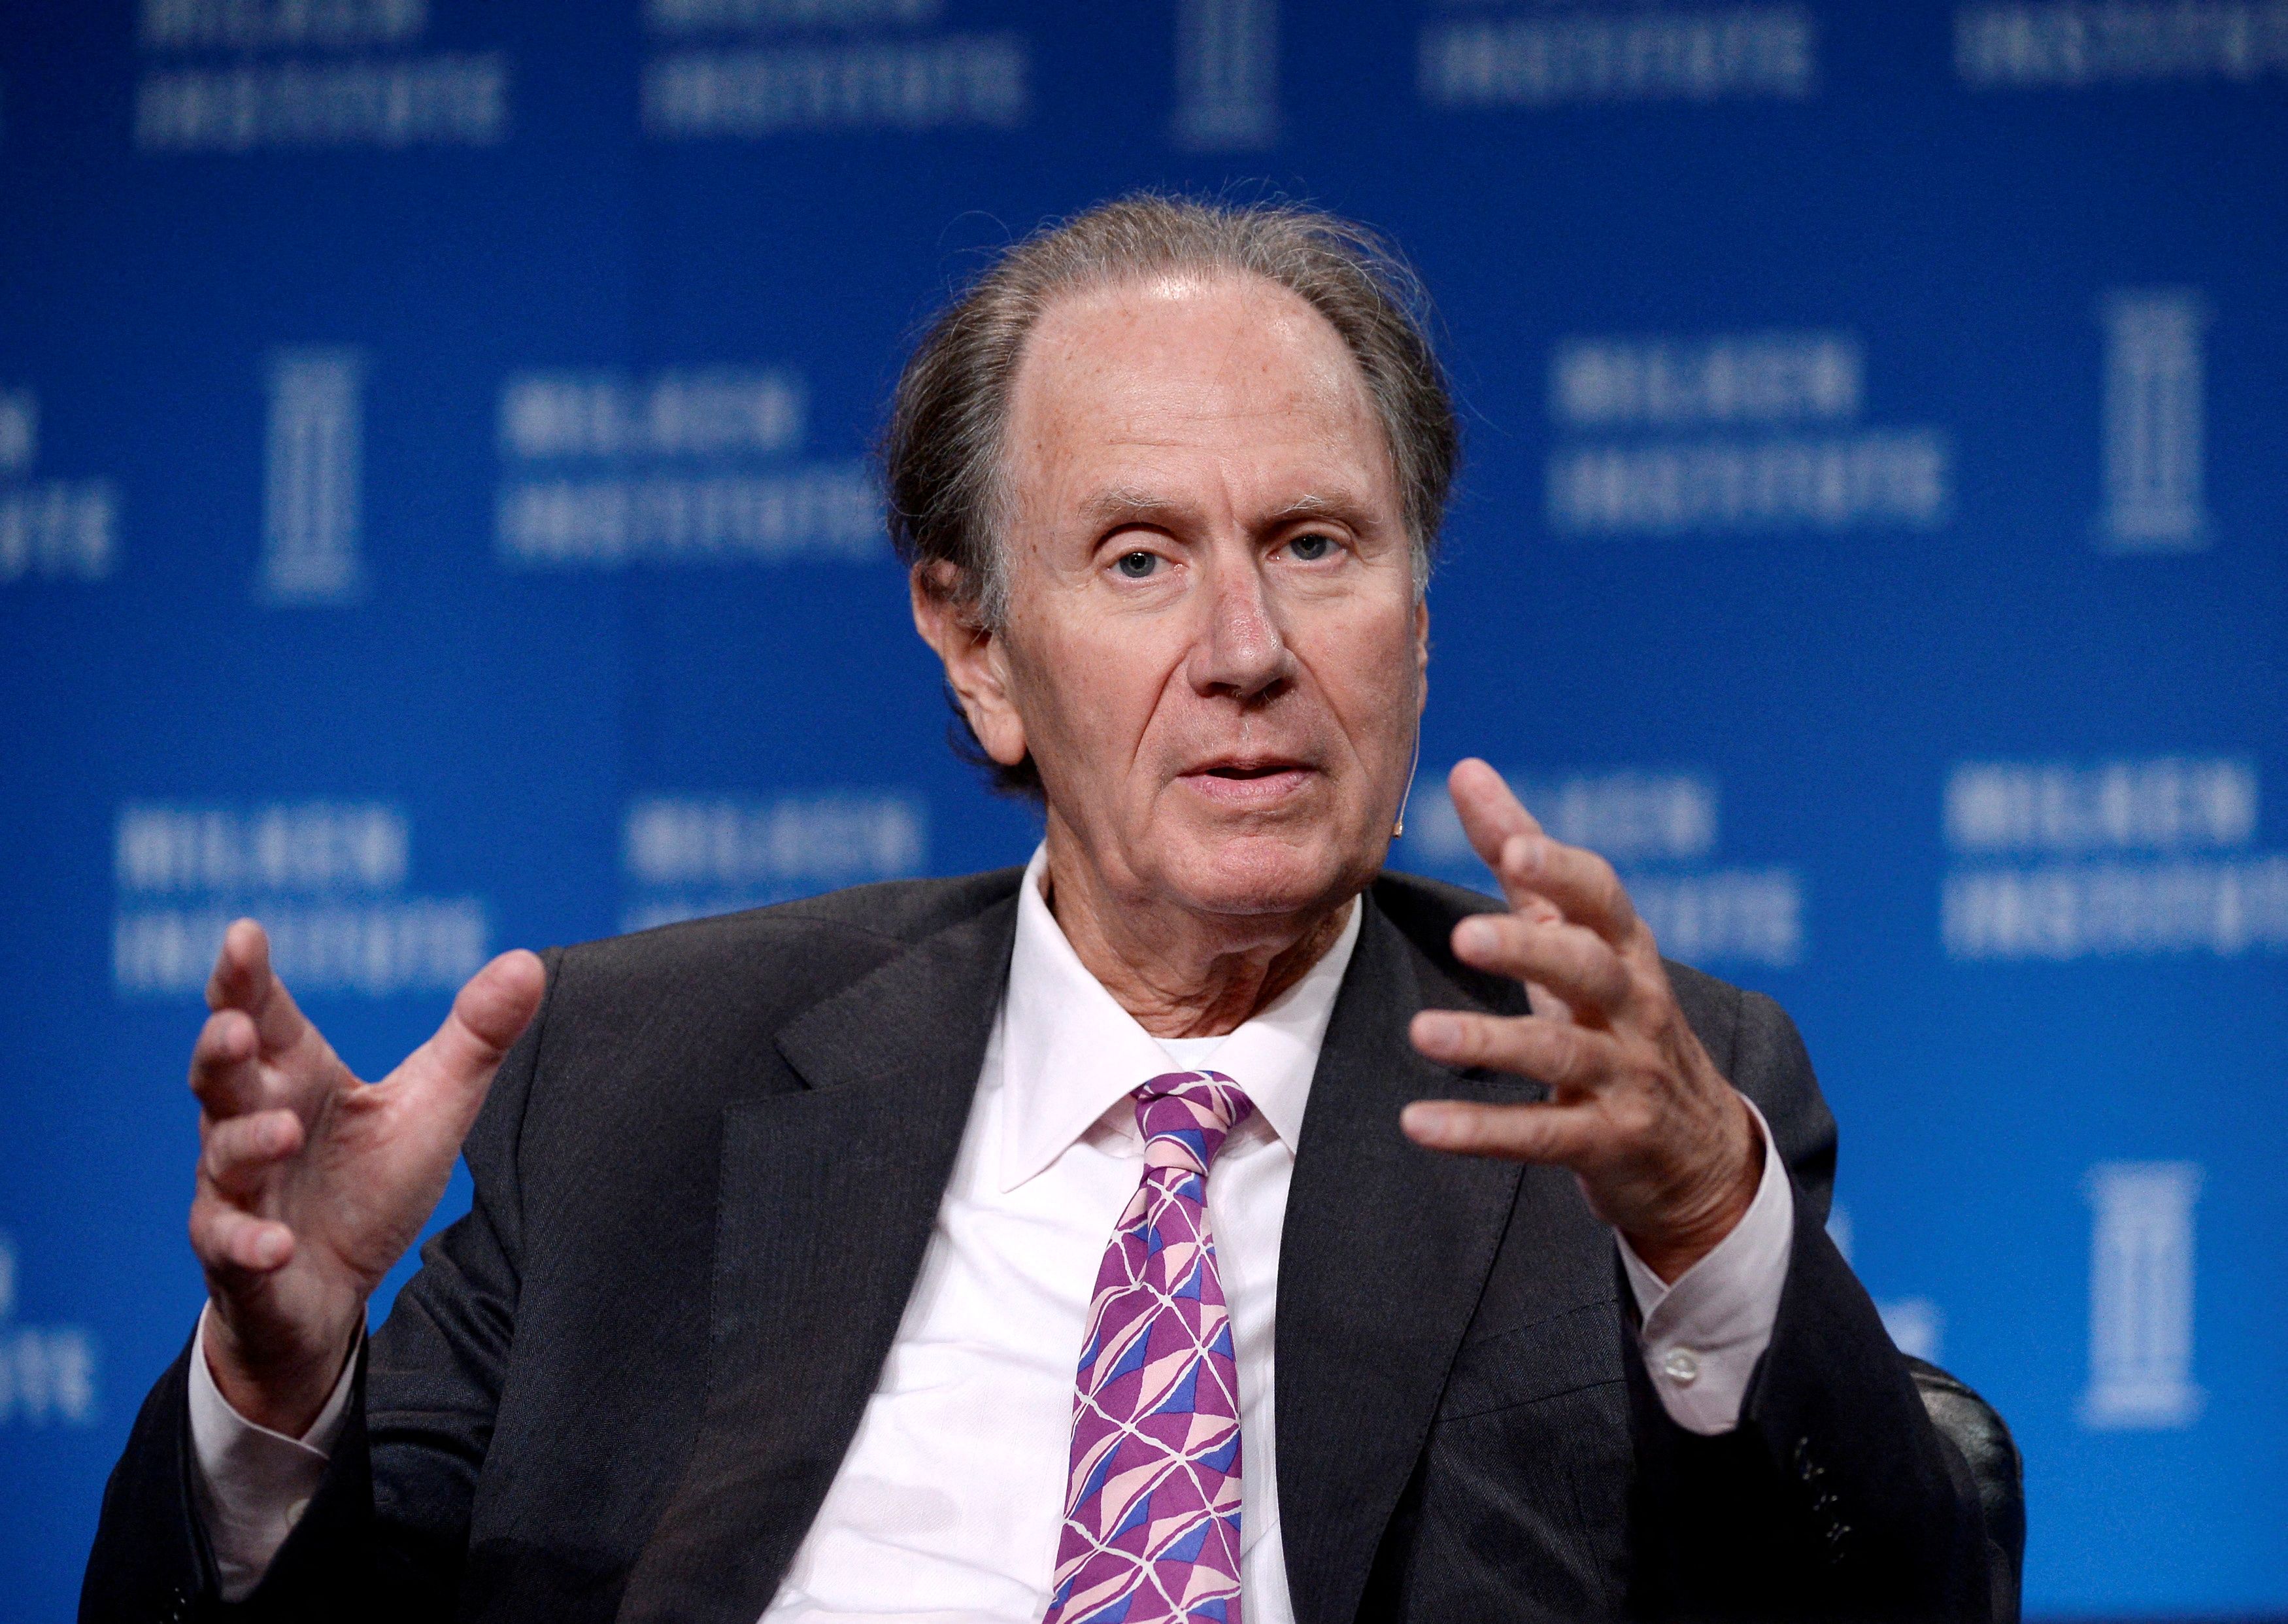 David Bonderman, Founding Partner, TPG, takes part in Private Equity: Rebalancing Risk session during the 2014 Milken Institute Global Conference in Beverly Hills